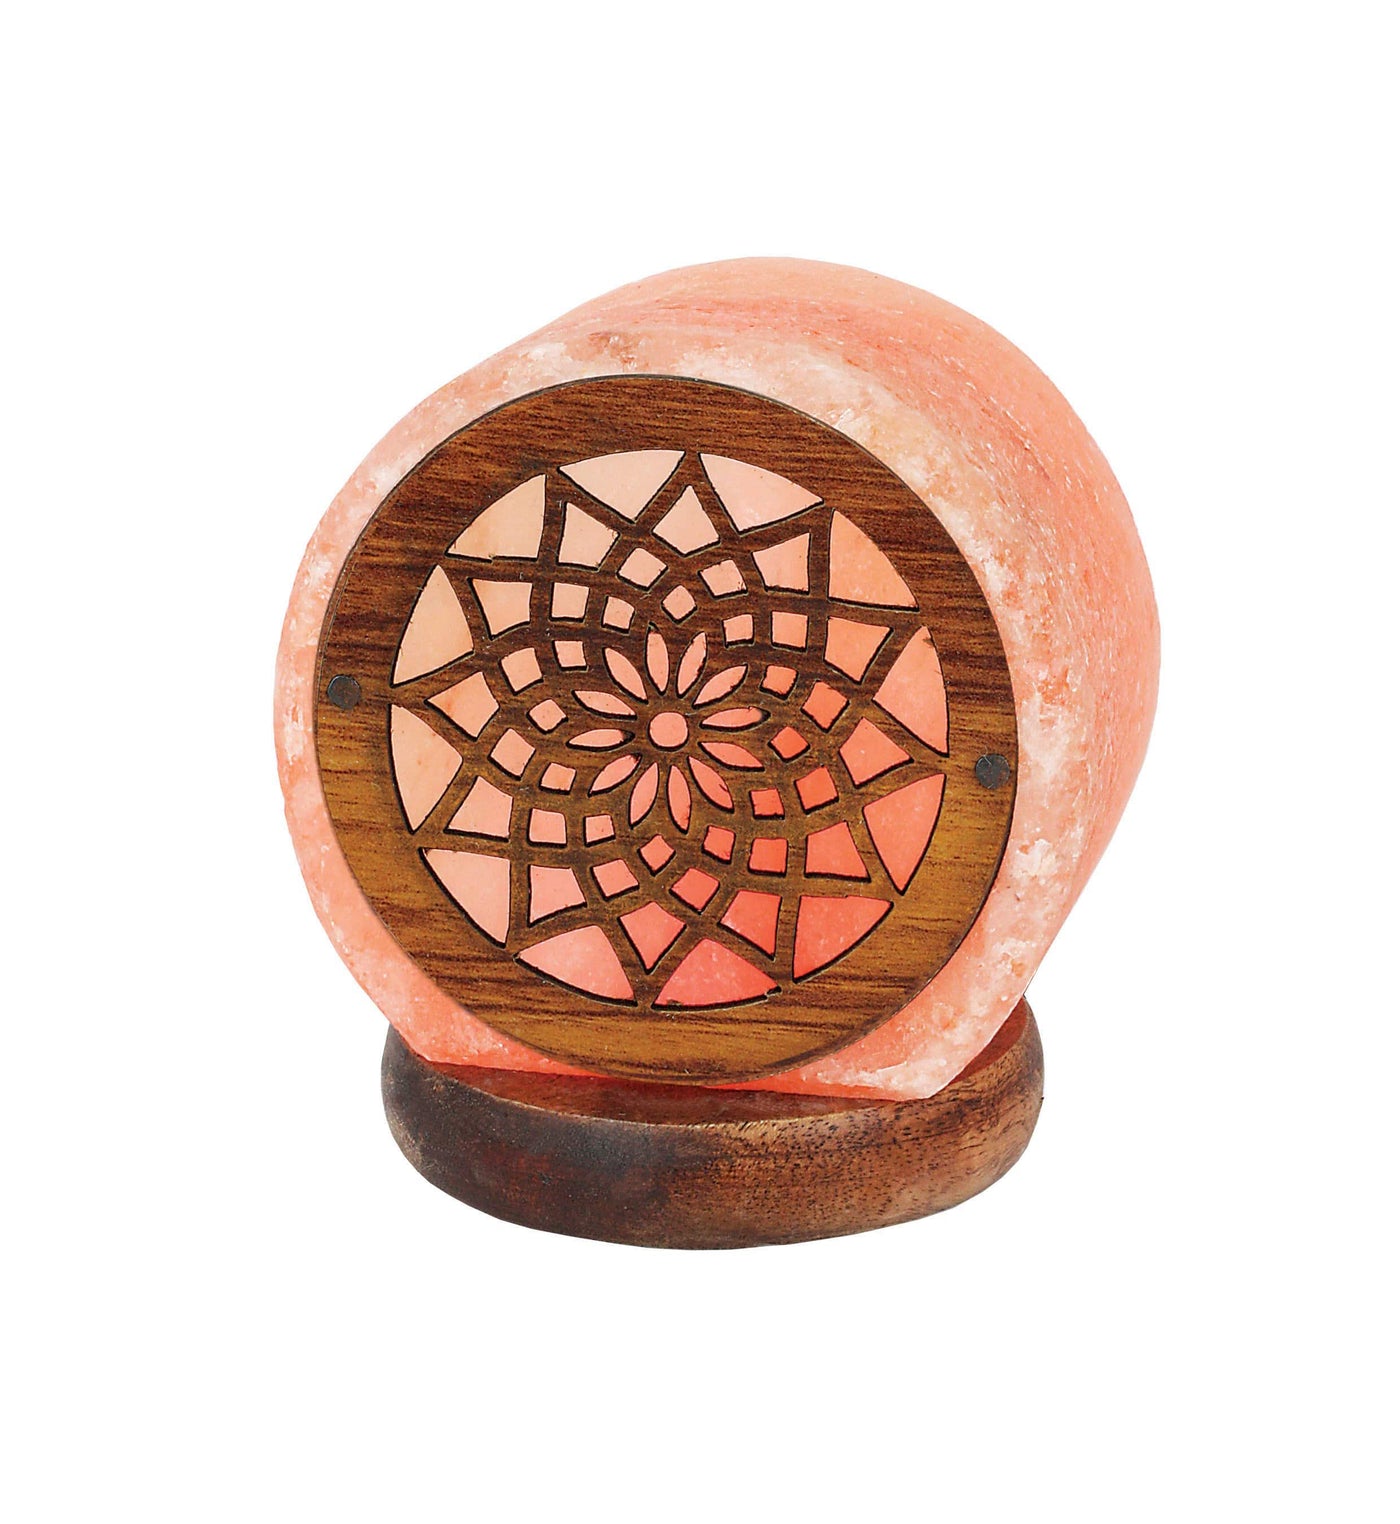 himalayan salt lamp with a flower pattern in the front 